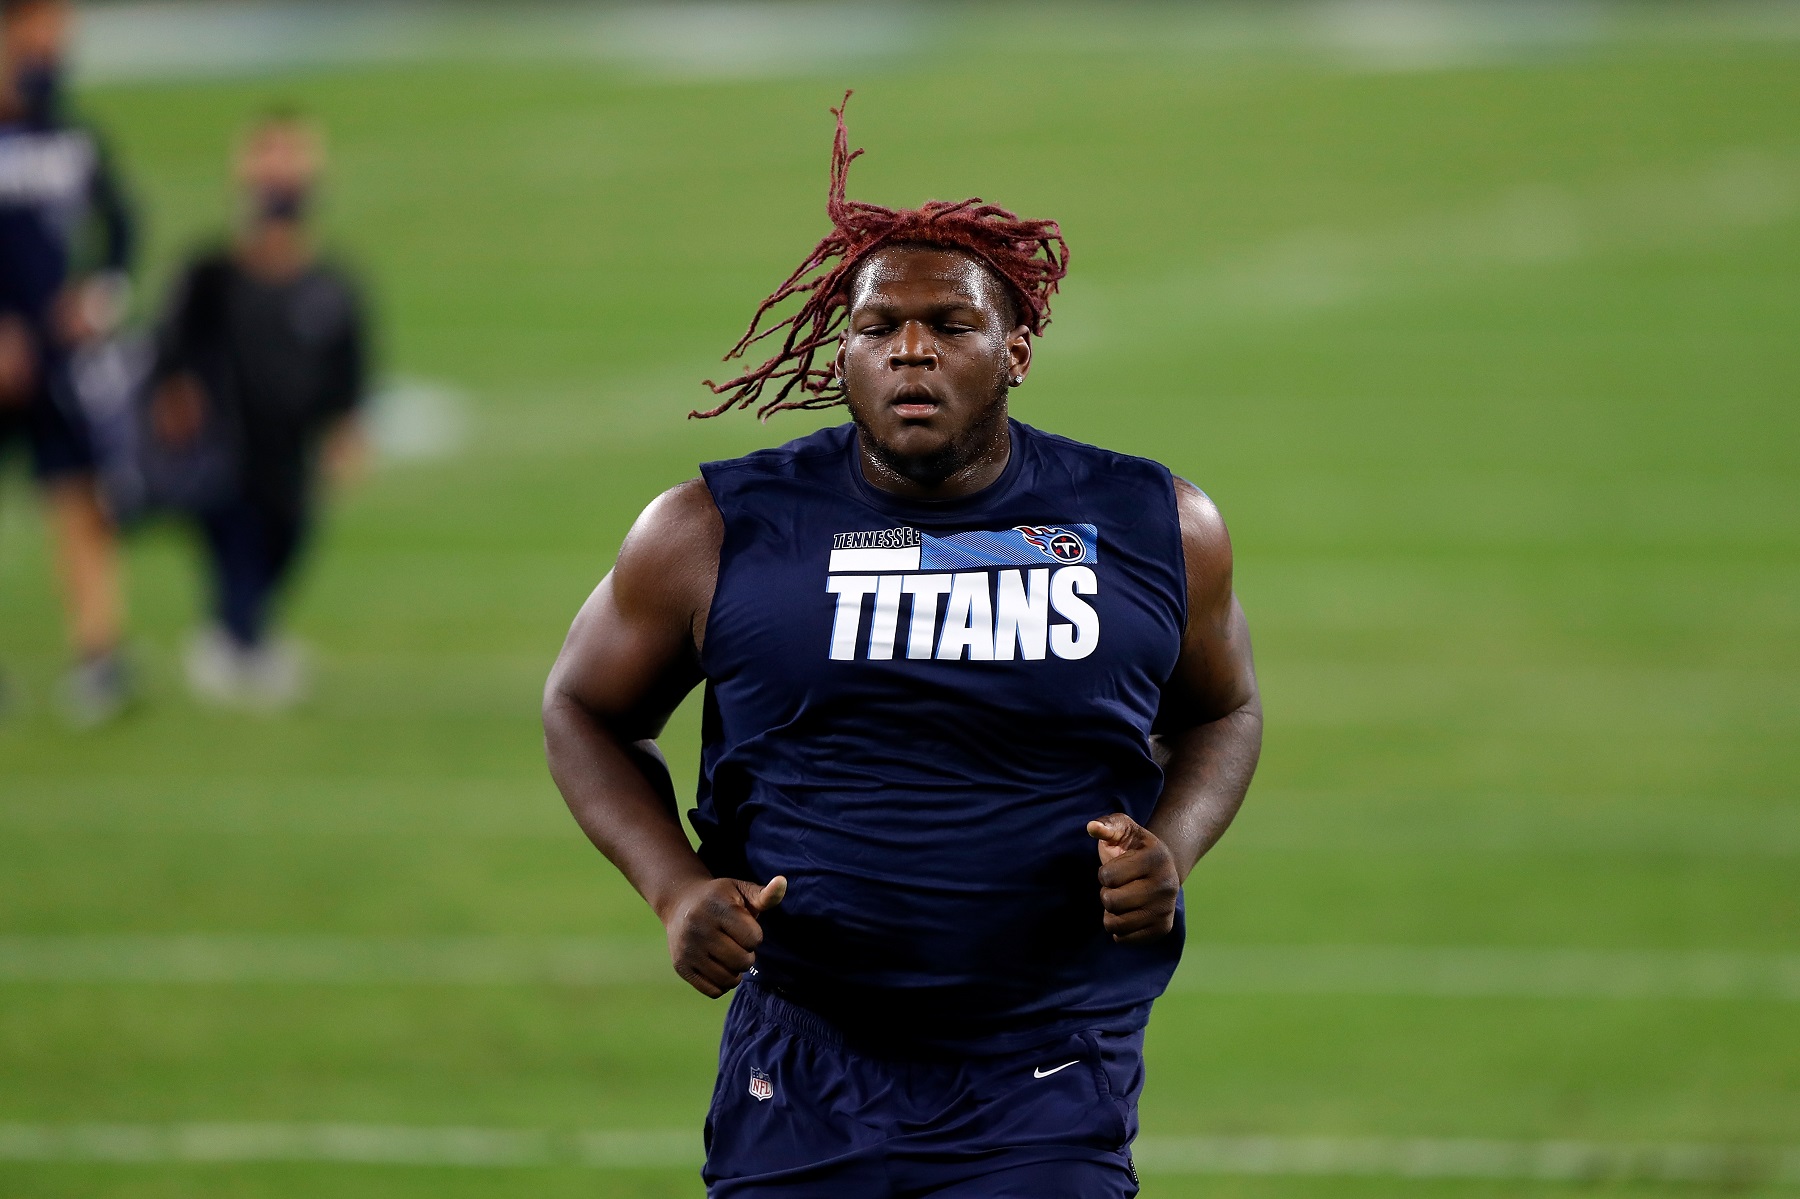 The Tennessee Titans Have $11.3 Million Disaster Isaiah Wilson on Their Hands on the Eve of the Playoffs